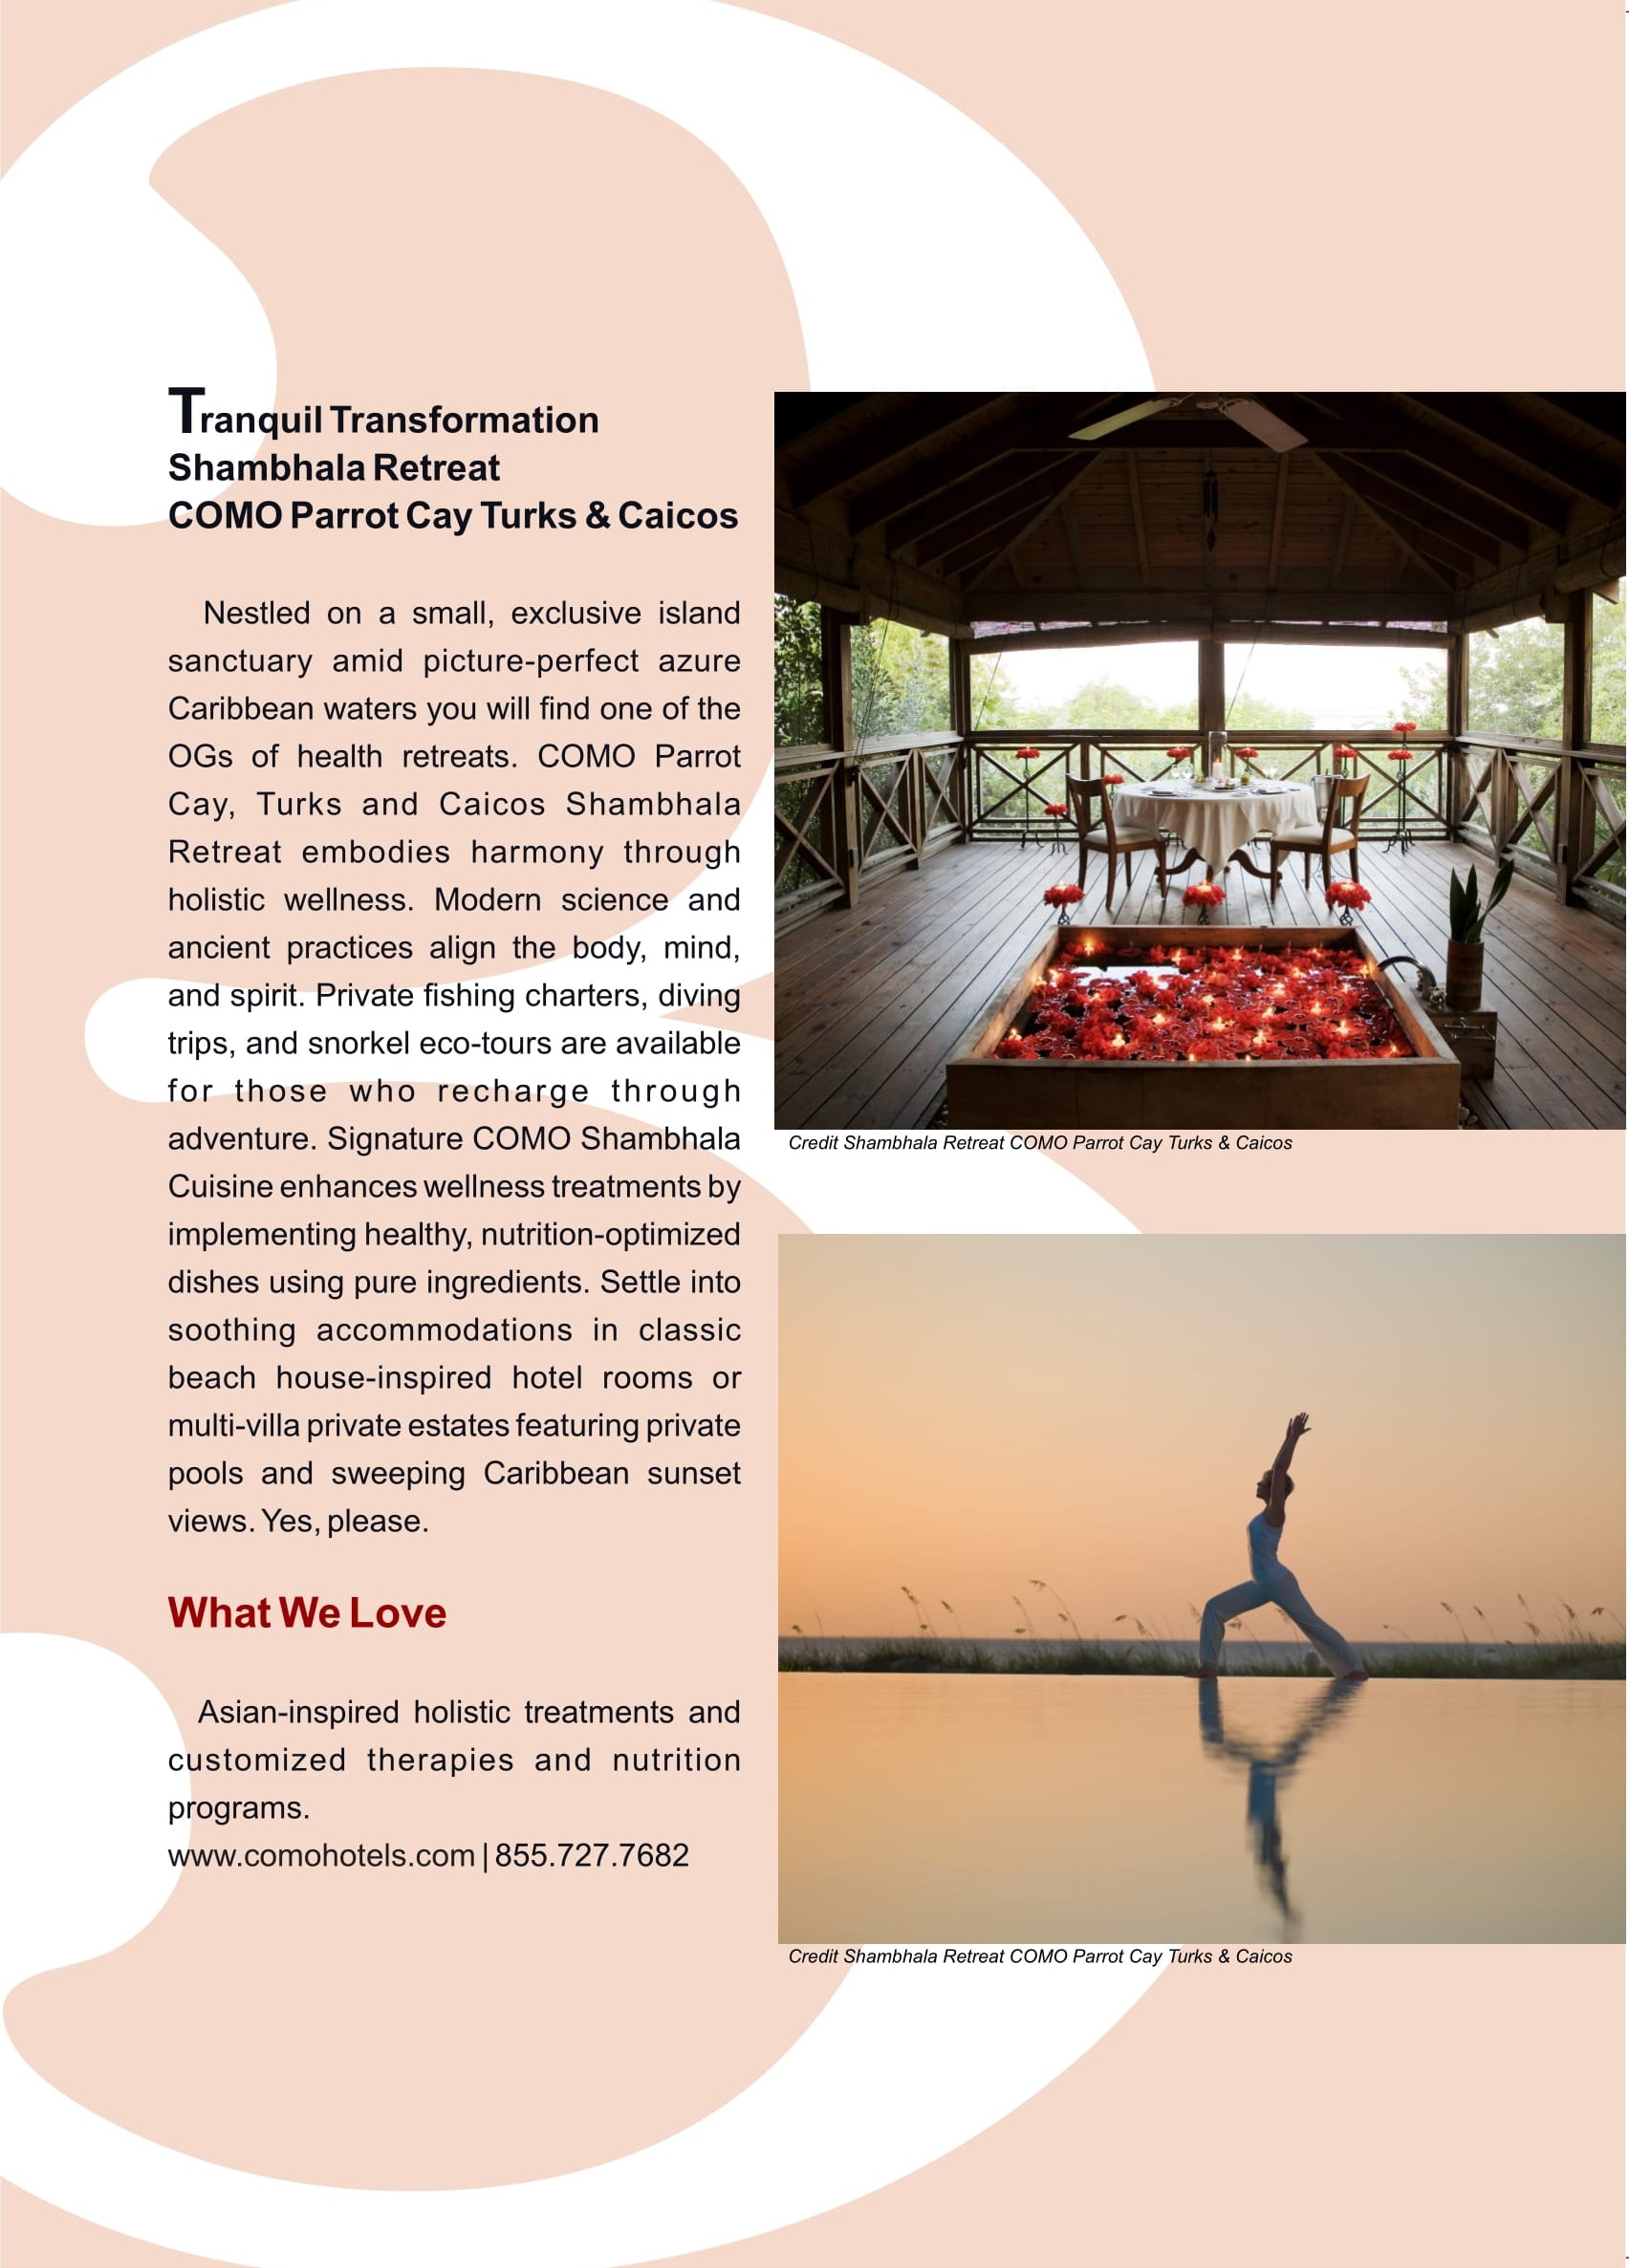 Wander for Wellness  at george magazine